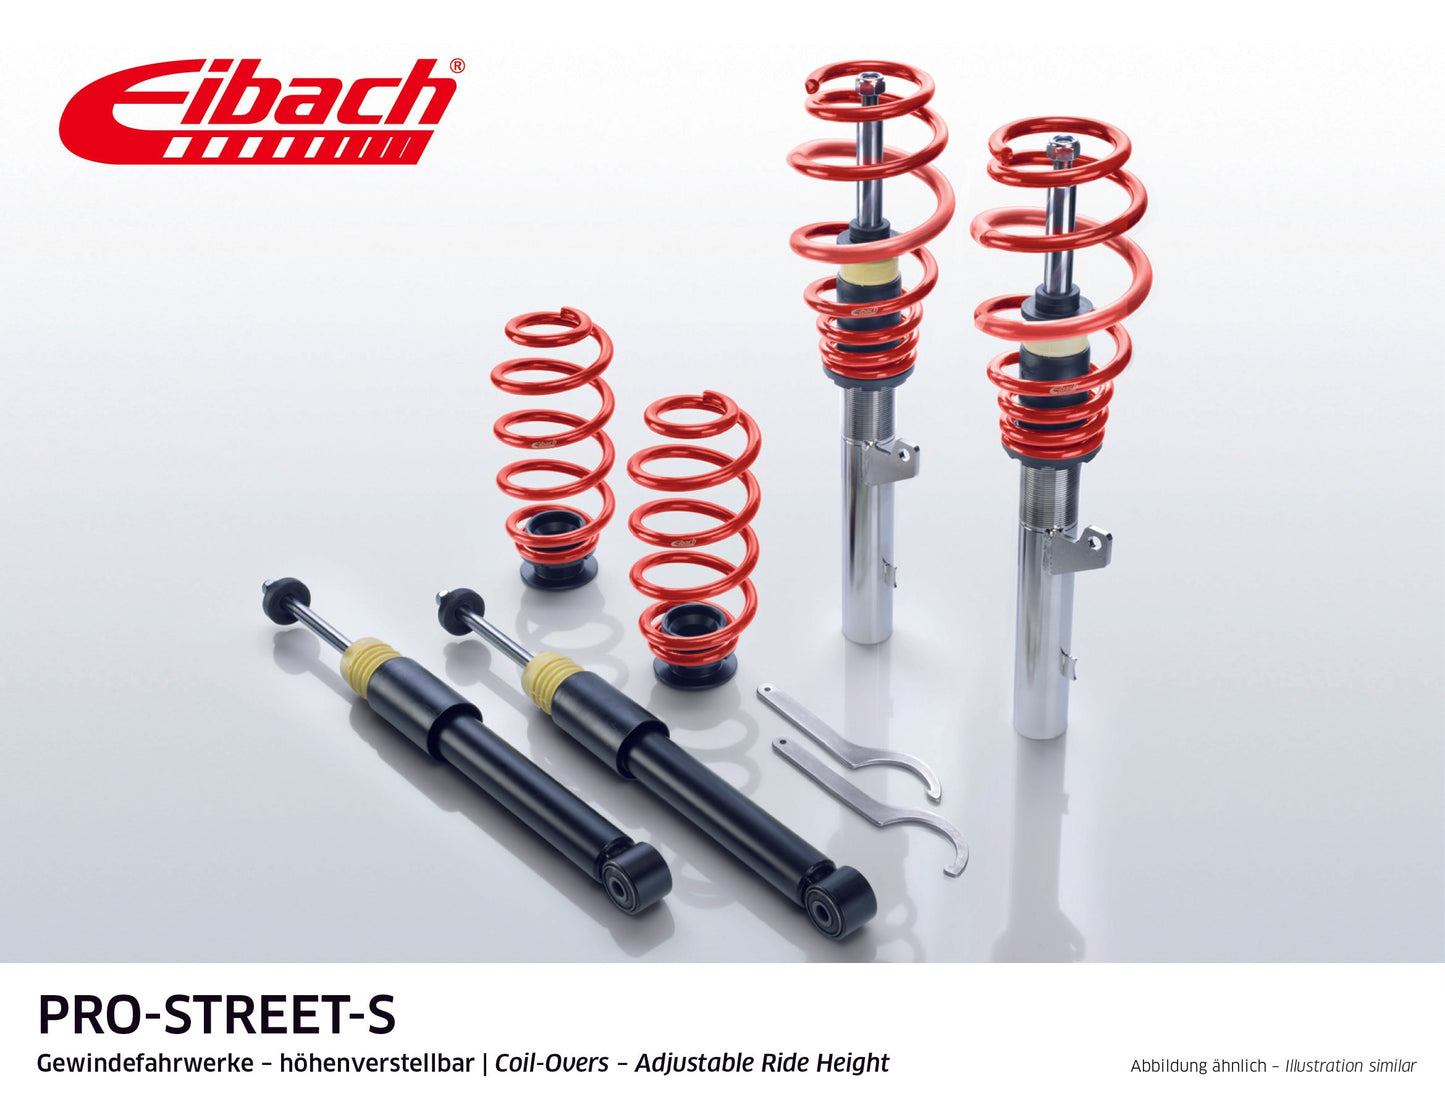 Eibach Pro-Street Coilover (PSS65-20-005-01-22) at £1303.00